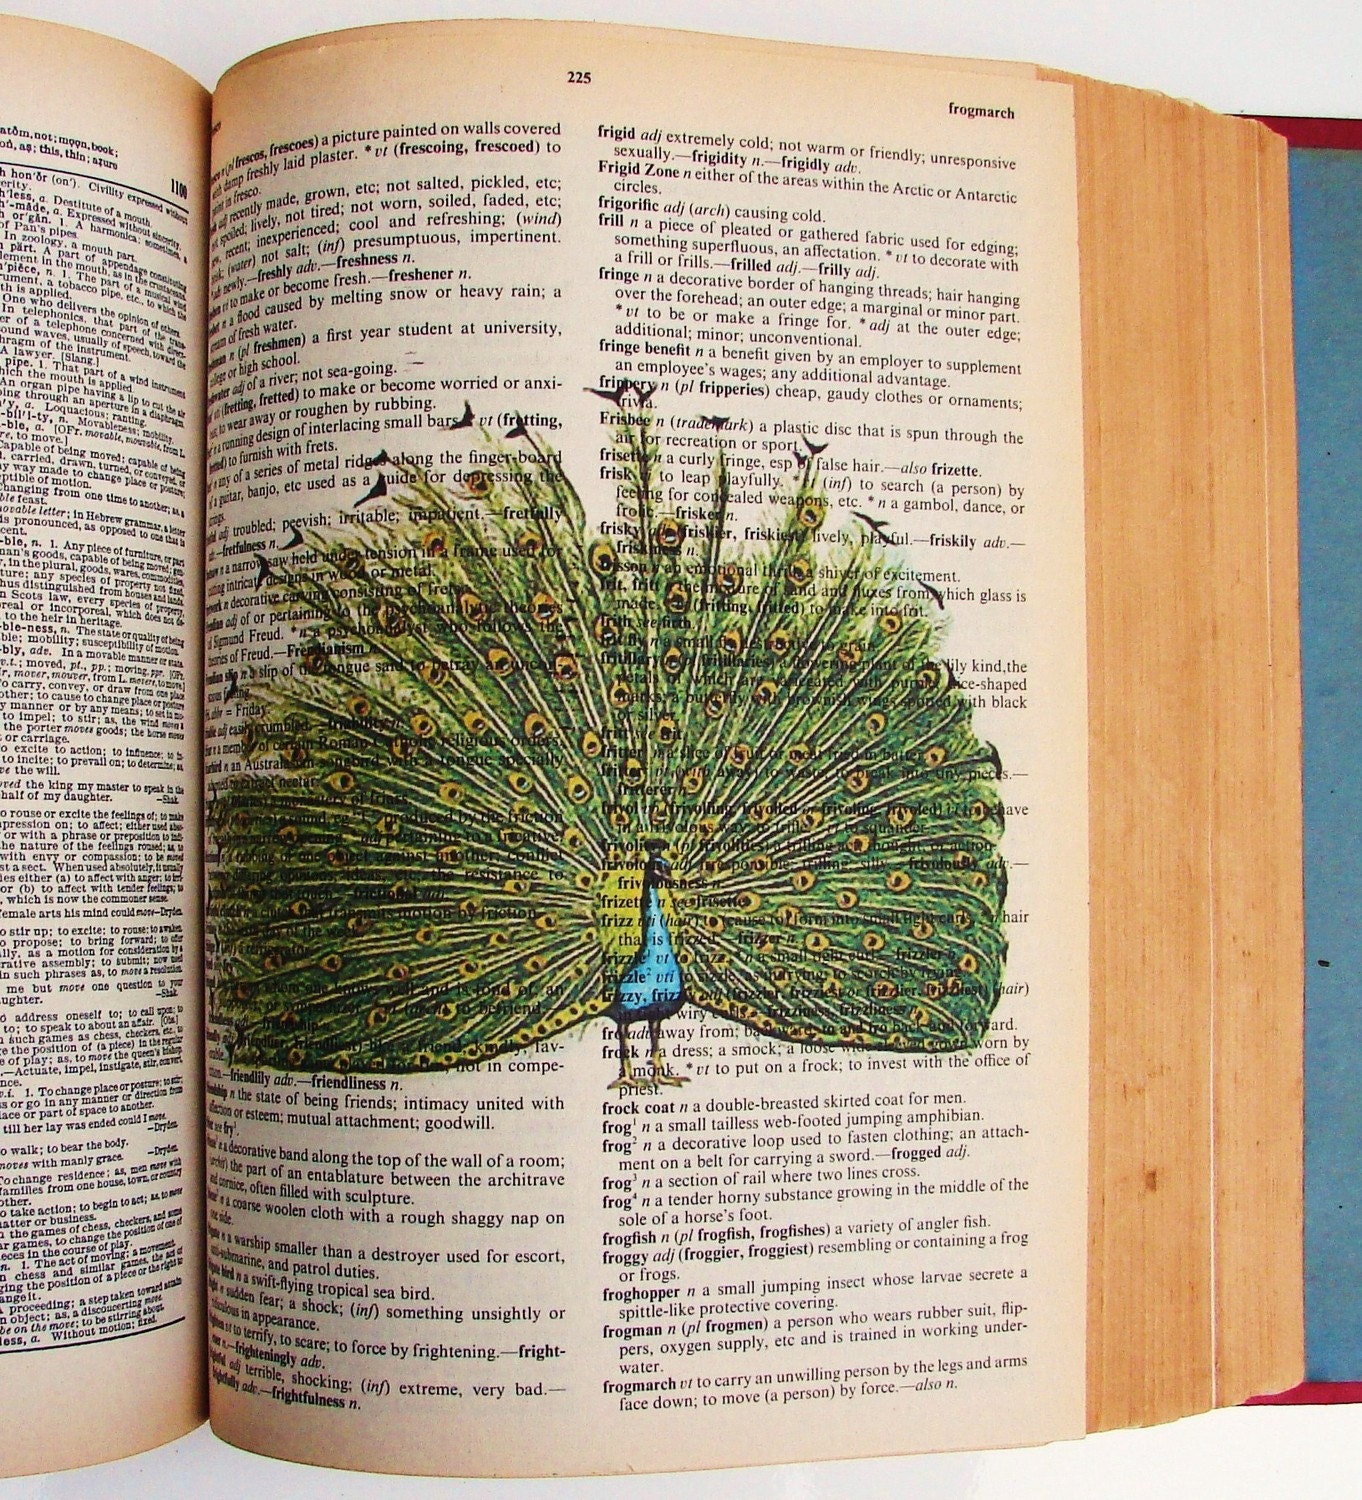 8x10 DICTIONARY Print - Repurposed Vintage Book Page - Large Peacock Illustration